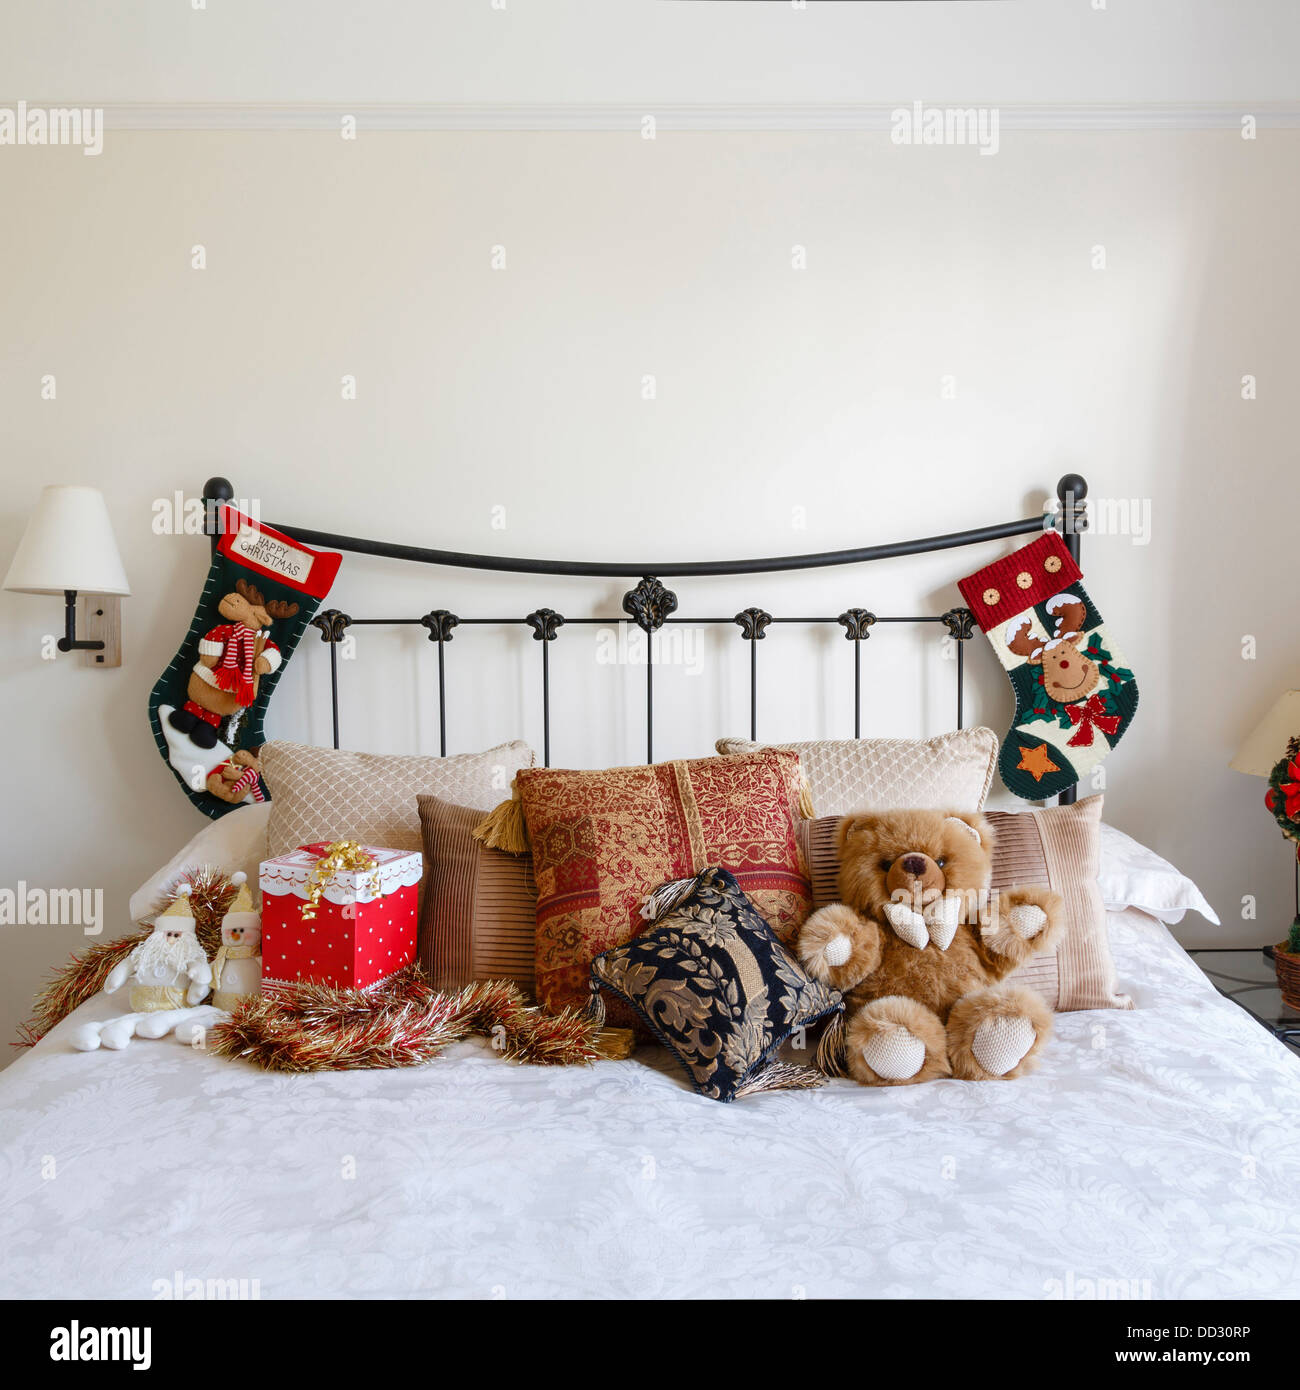 Cozy bedroom with Christmas decorations and stockings Stock Photo